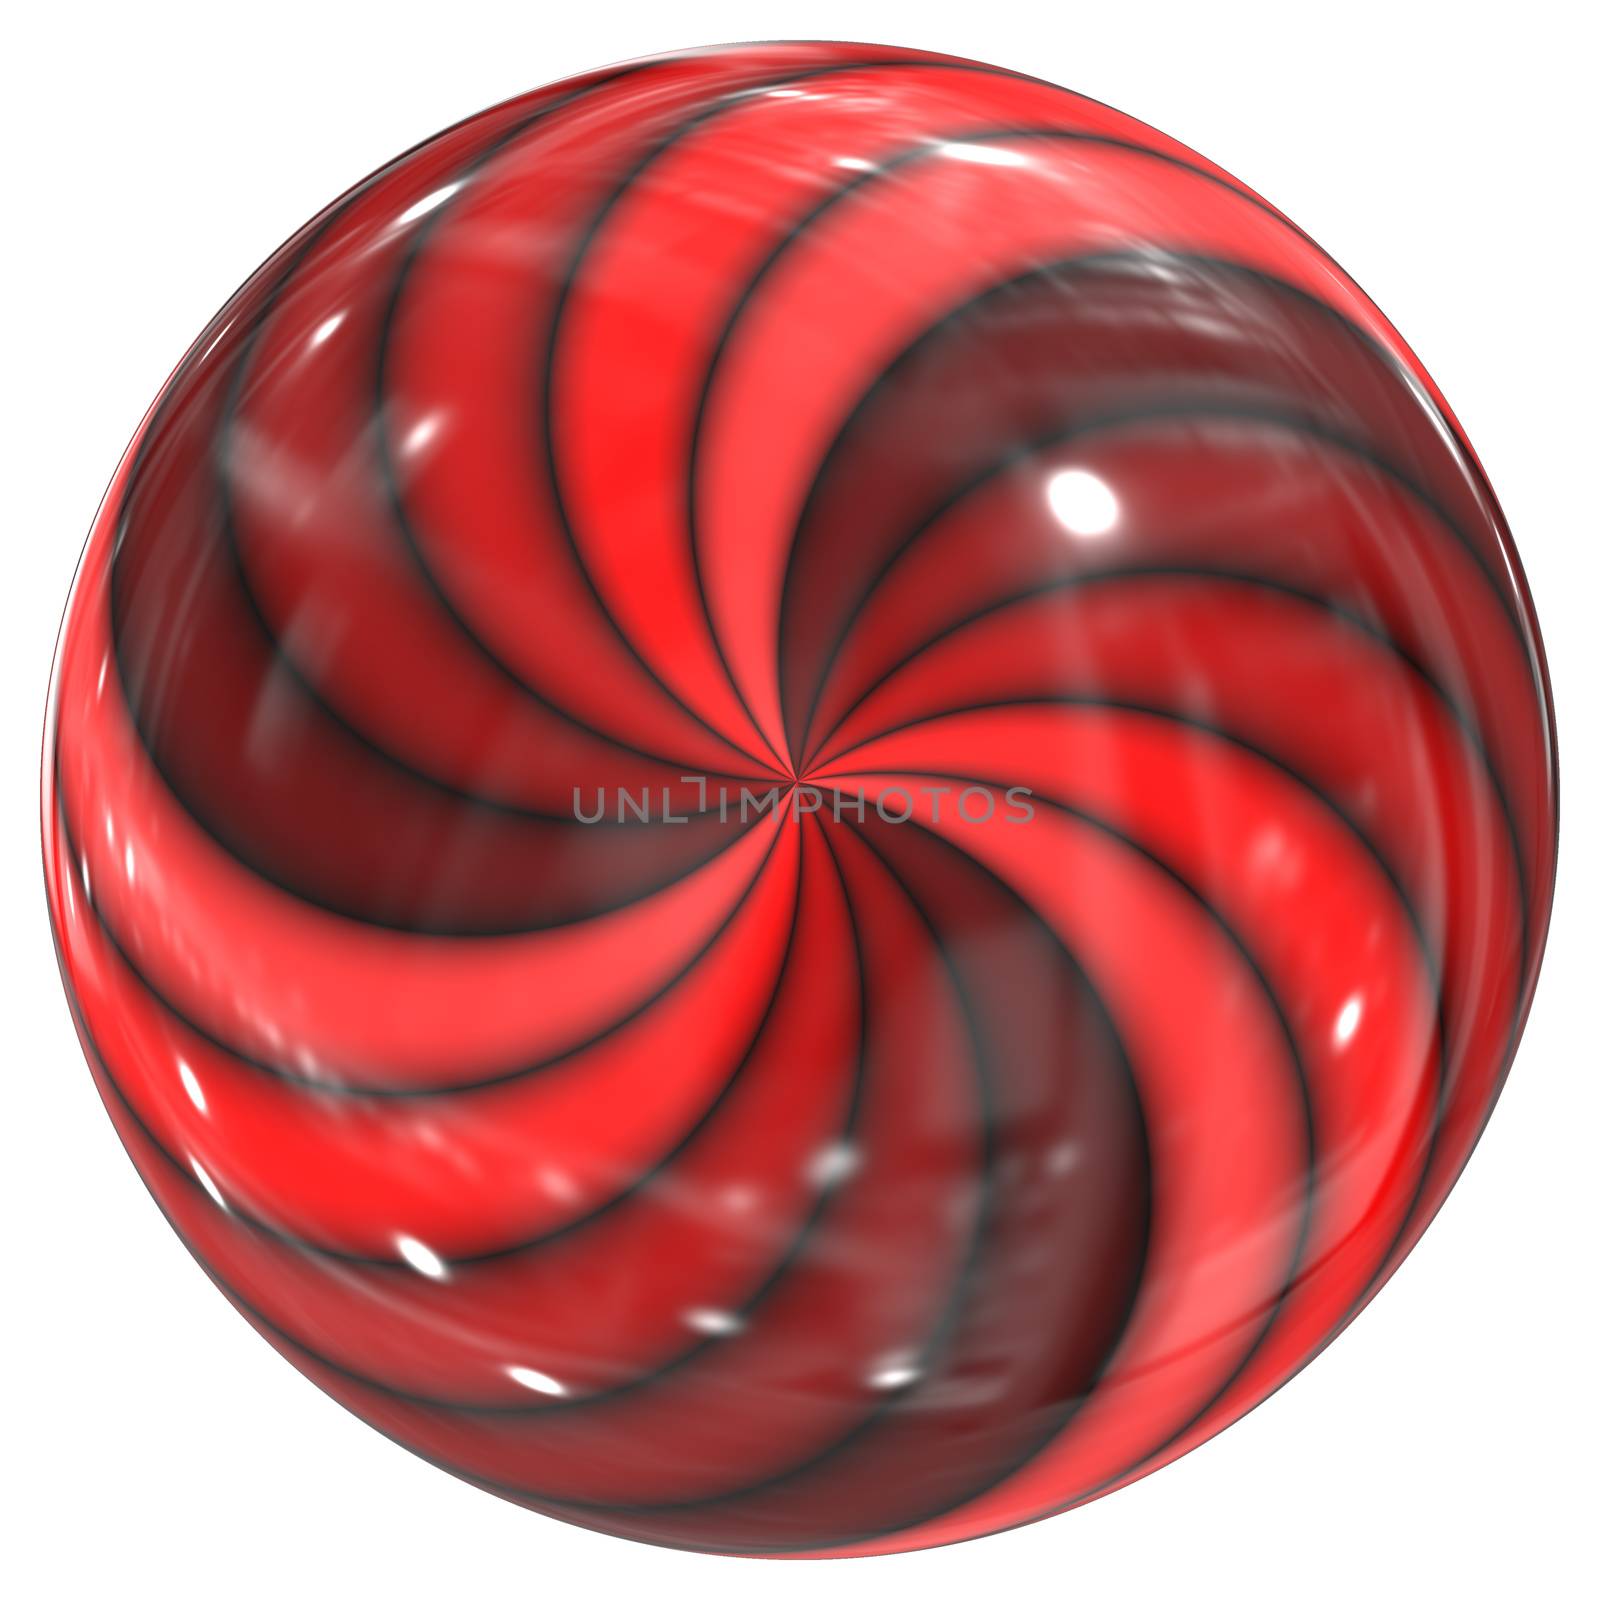 An illustration of a red swirl glass sphere